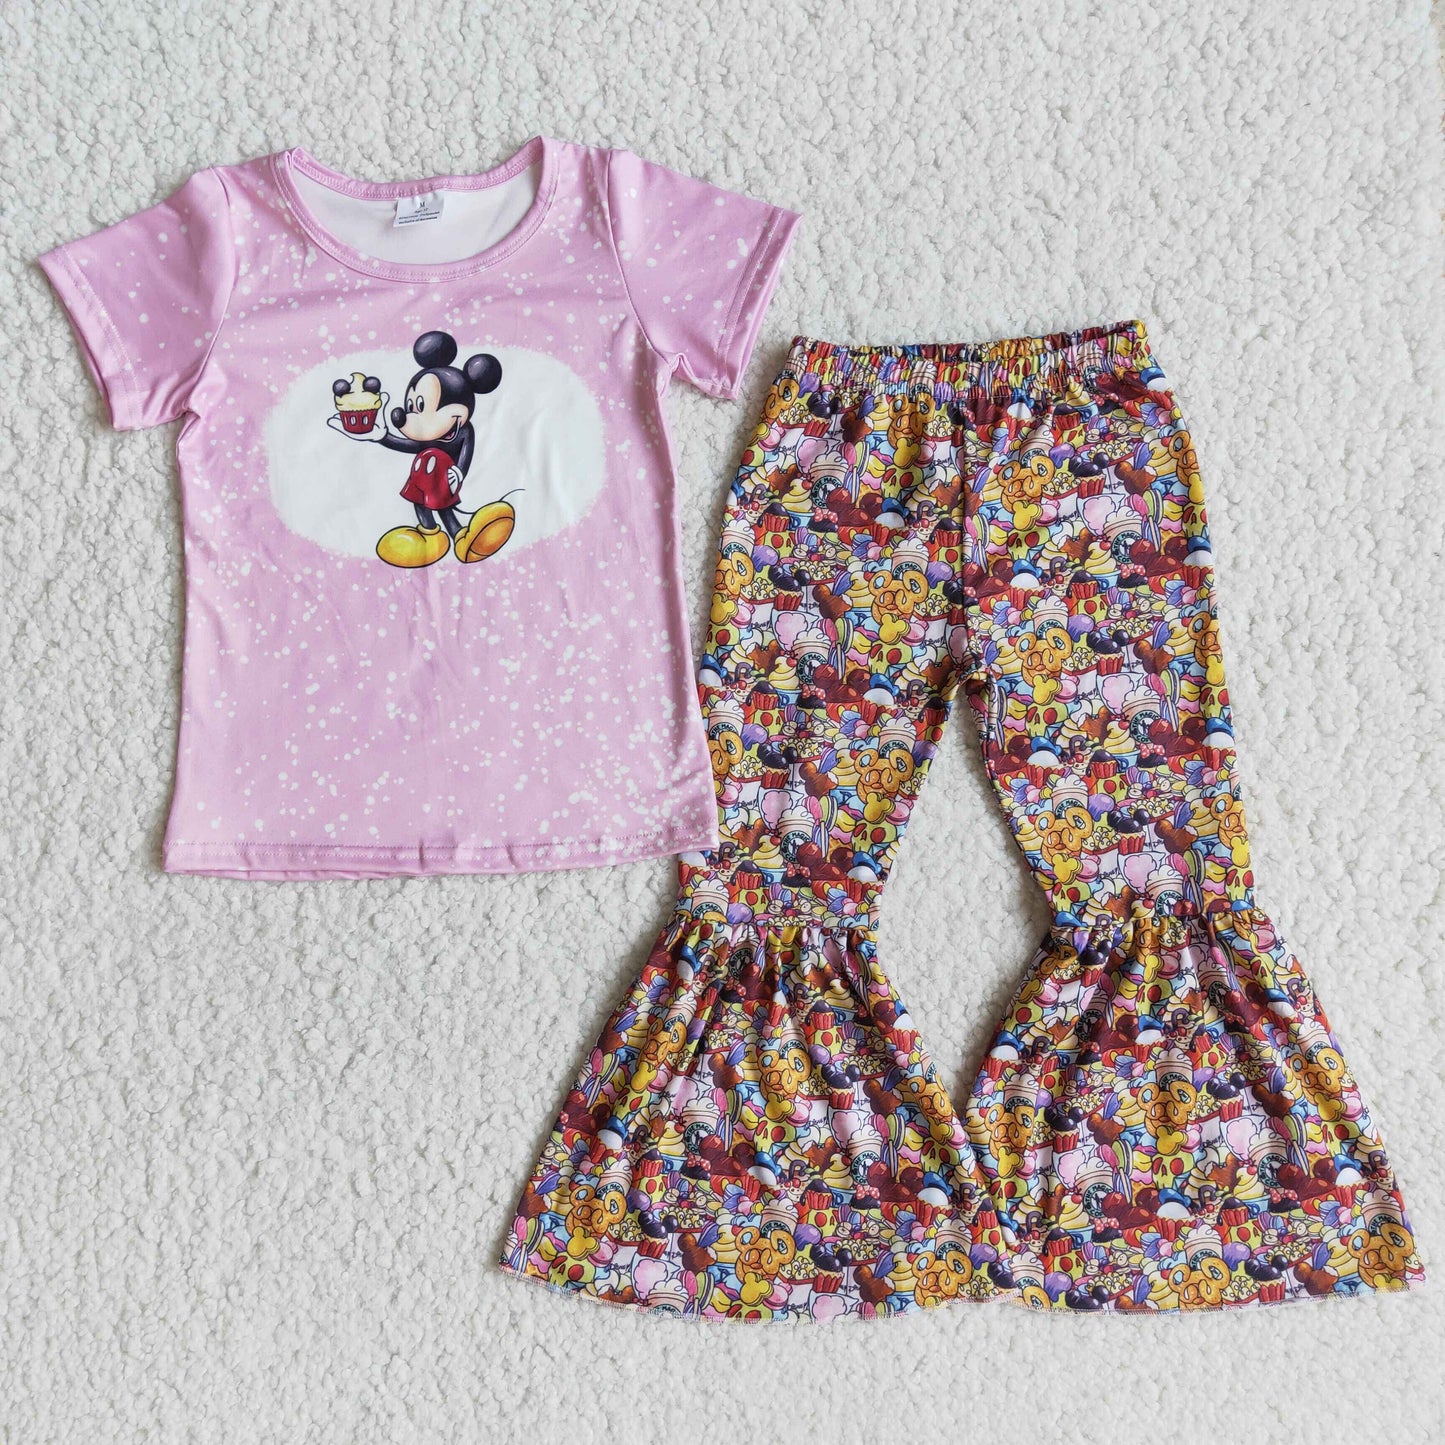 Cute mouse bleached shirt pants toddler girls boutique clothing set